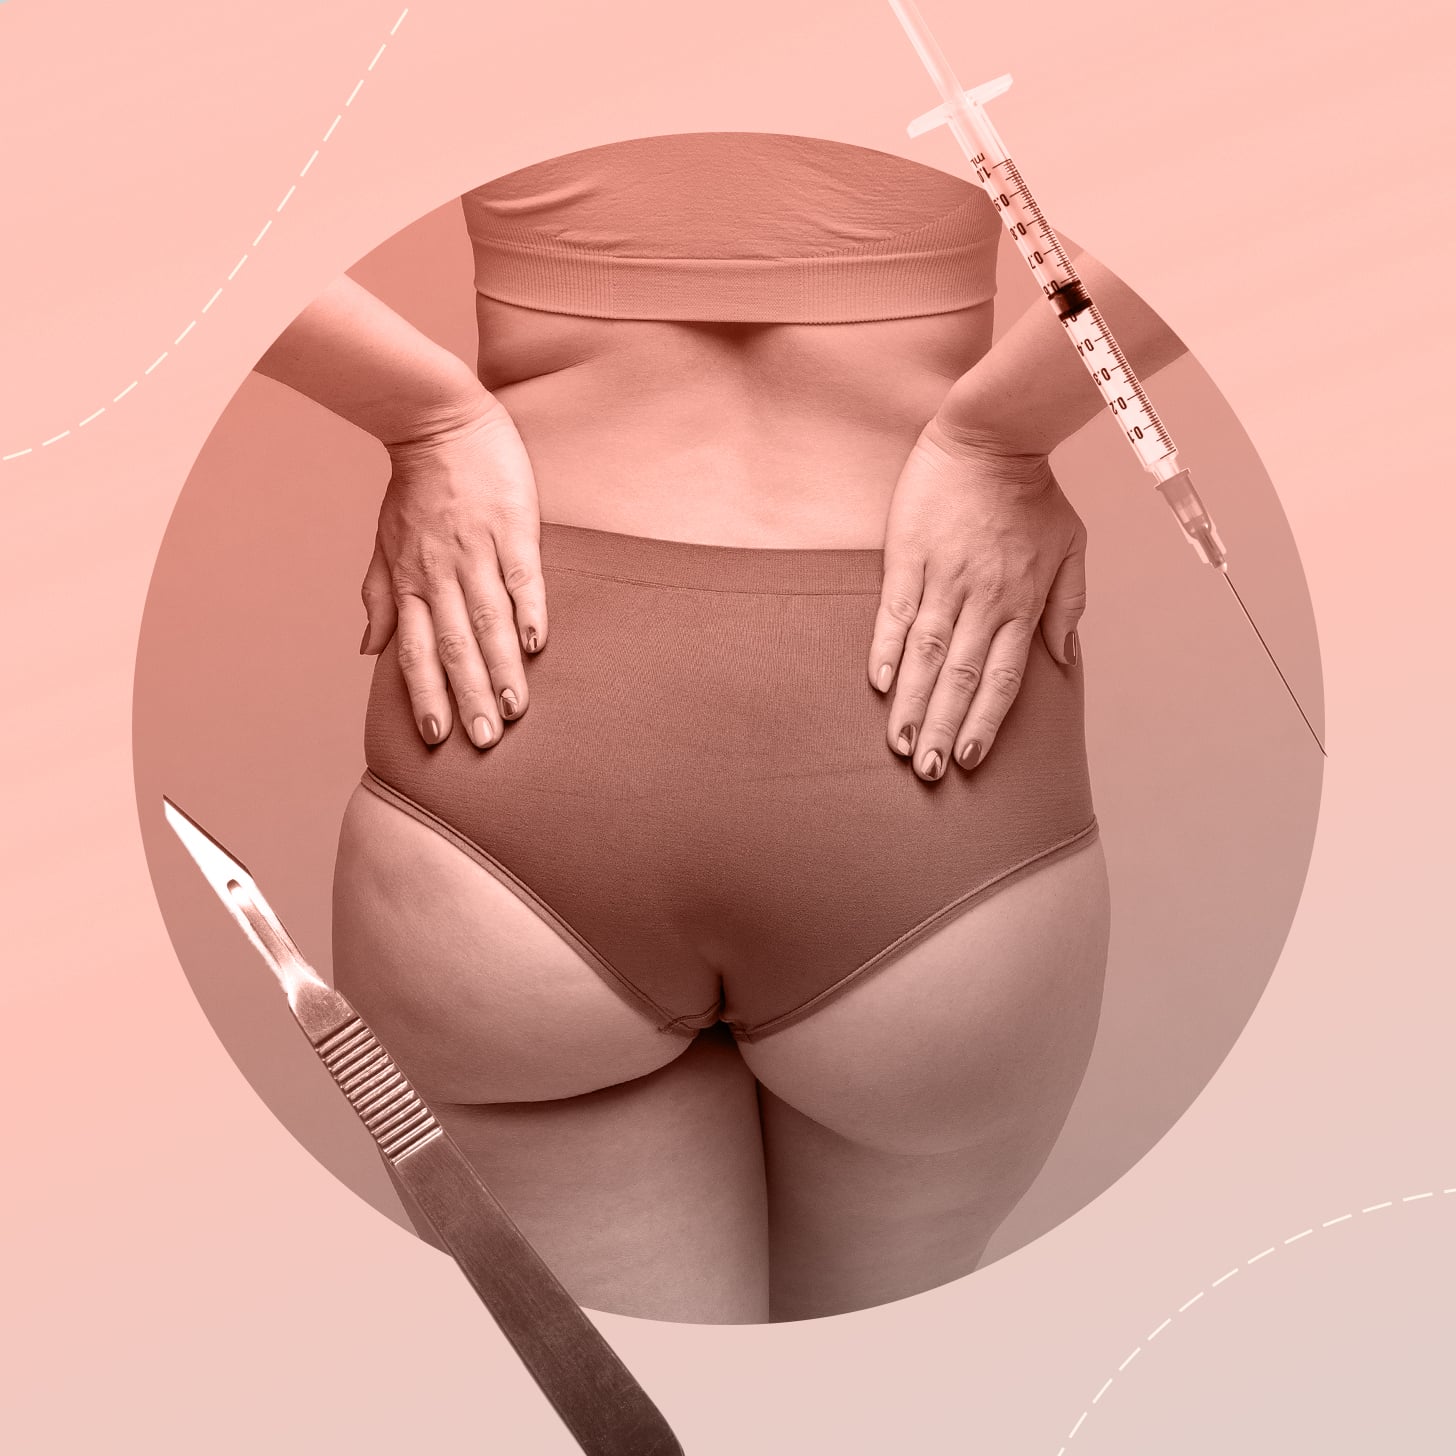 Risks of a Brazilian Butt Lift: What You Need to Know